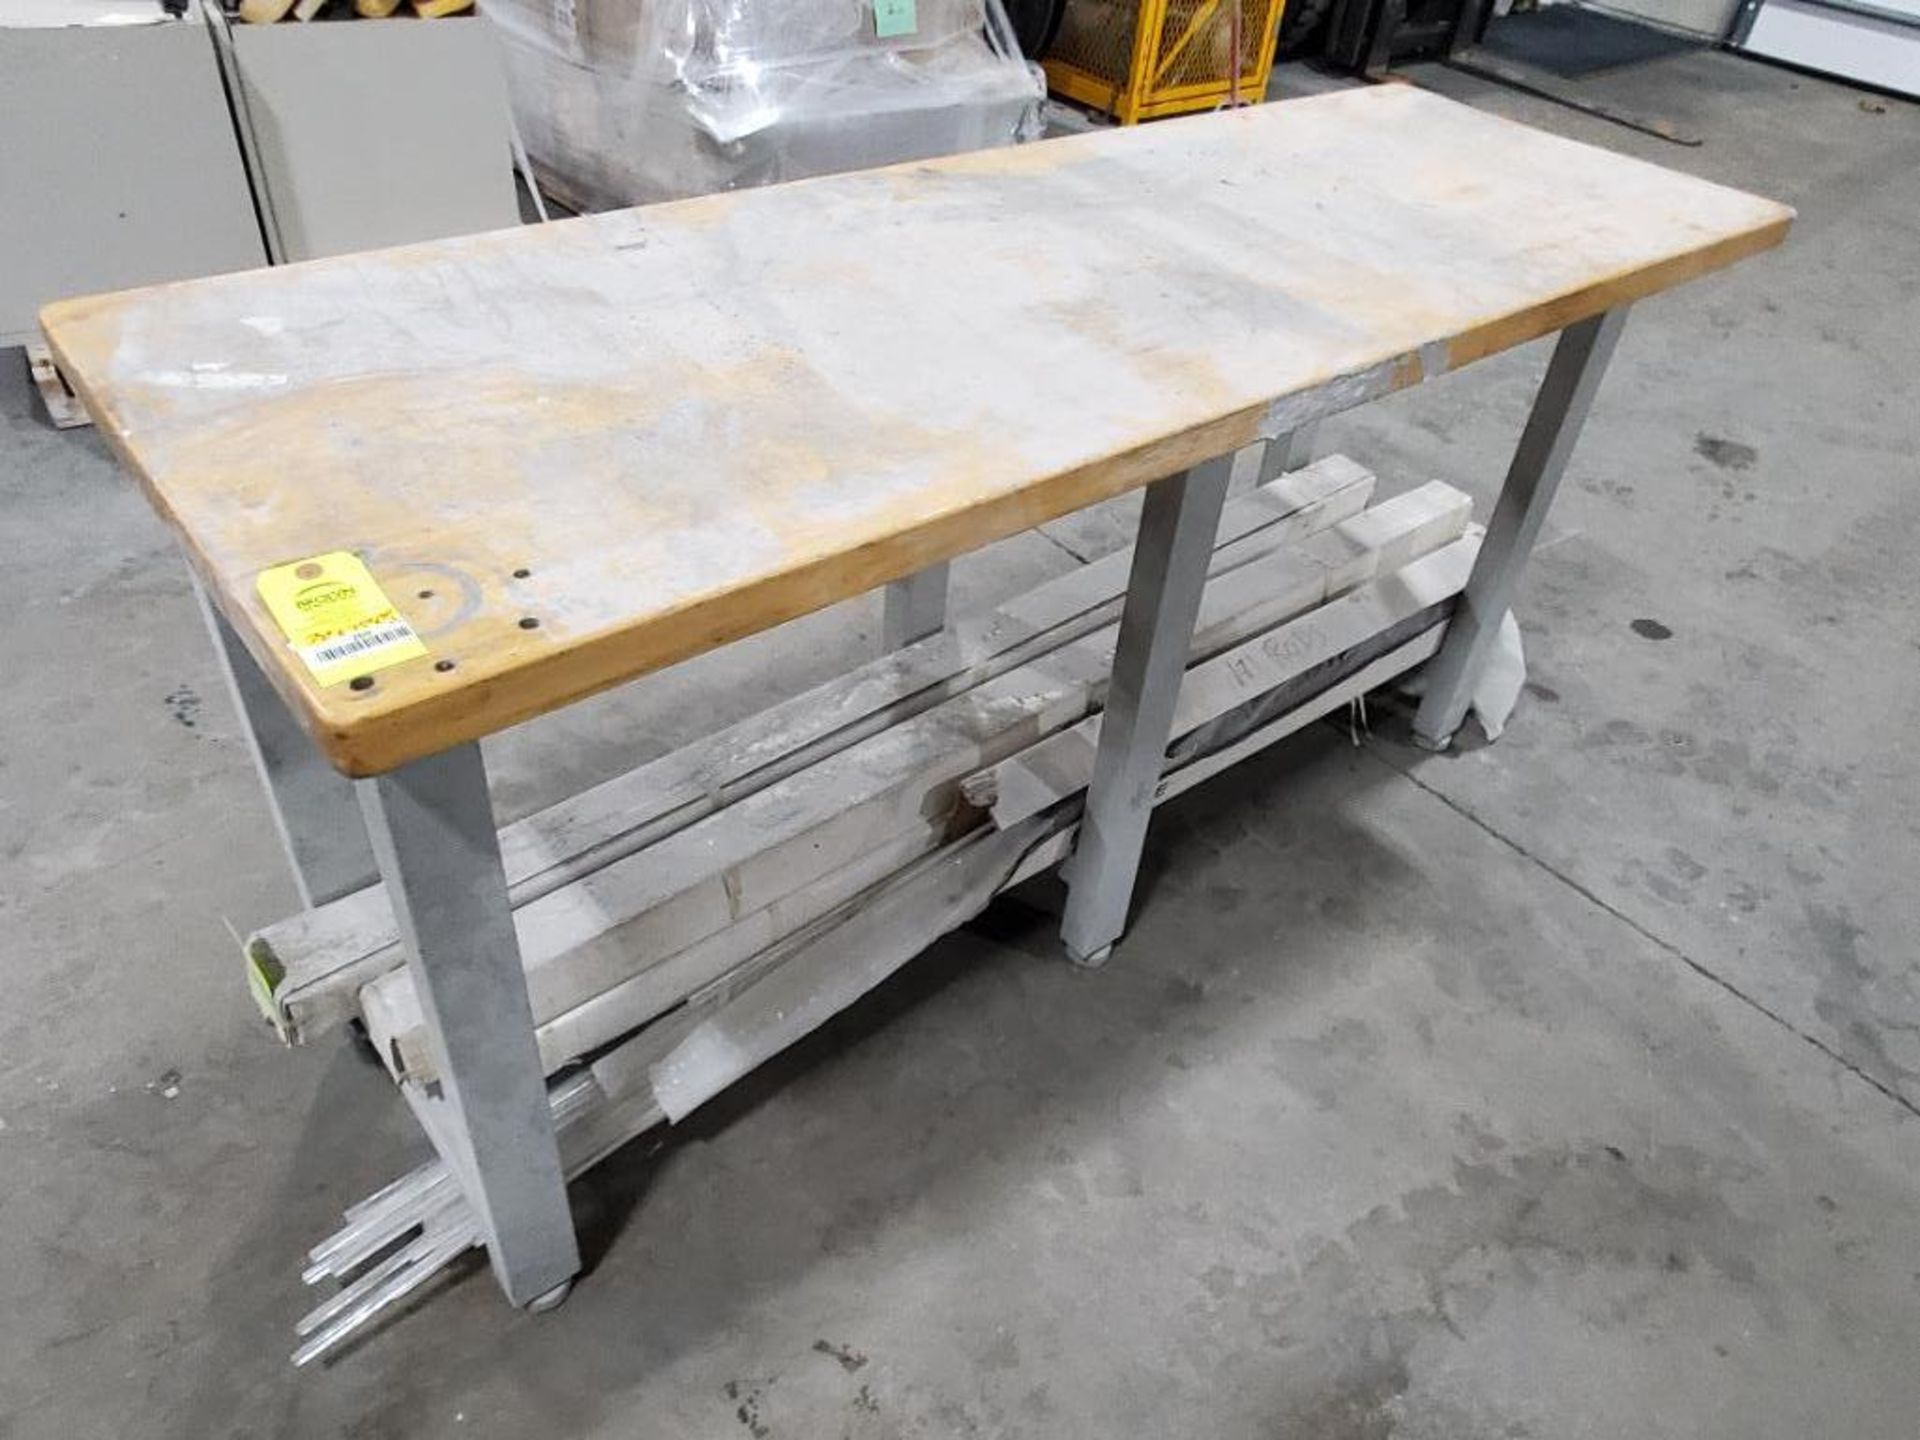 Wood top work bench. 72in x 25in x 30in tall.